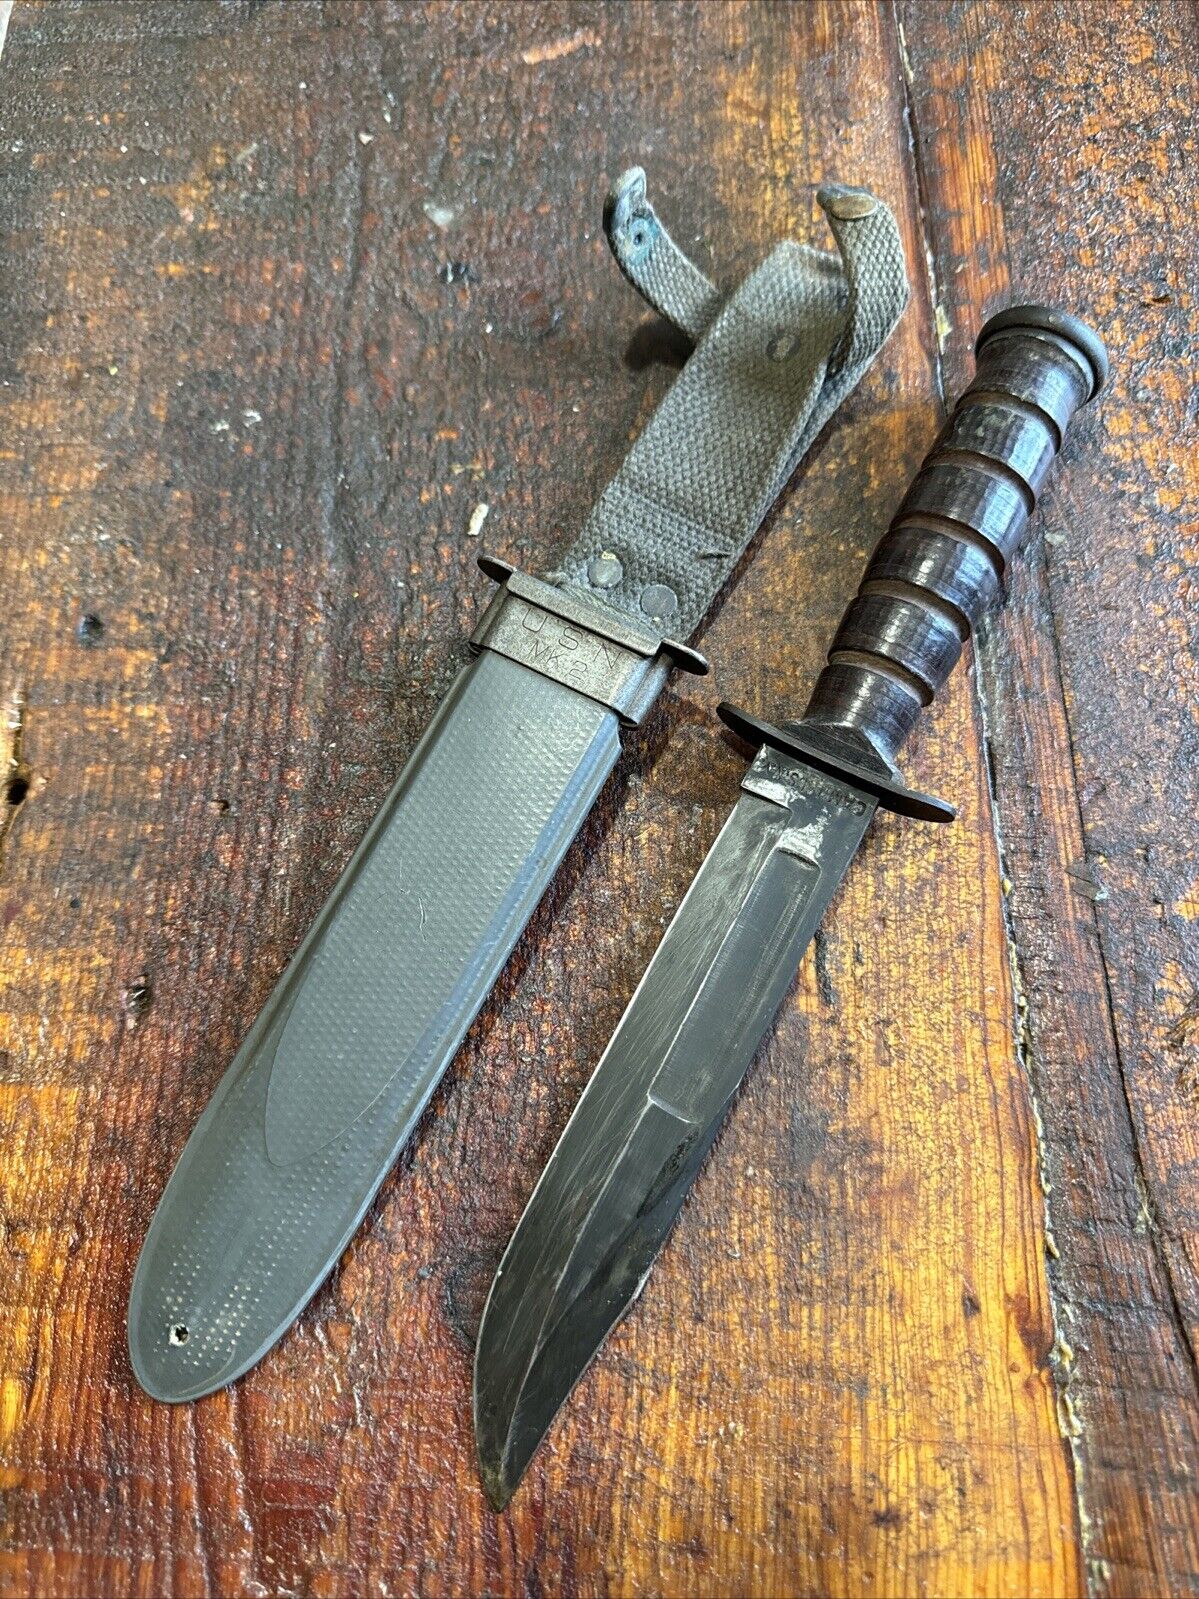 WWII US Navy Mk2 Fighting Knife USN Mark 2 Camillus N.Y. With Scabbard. (72)